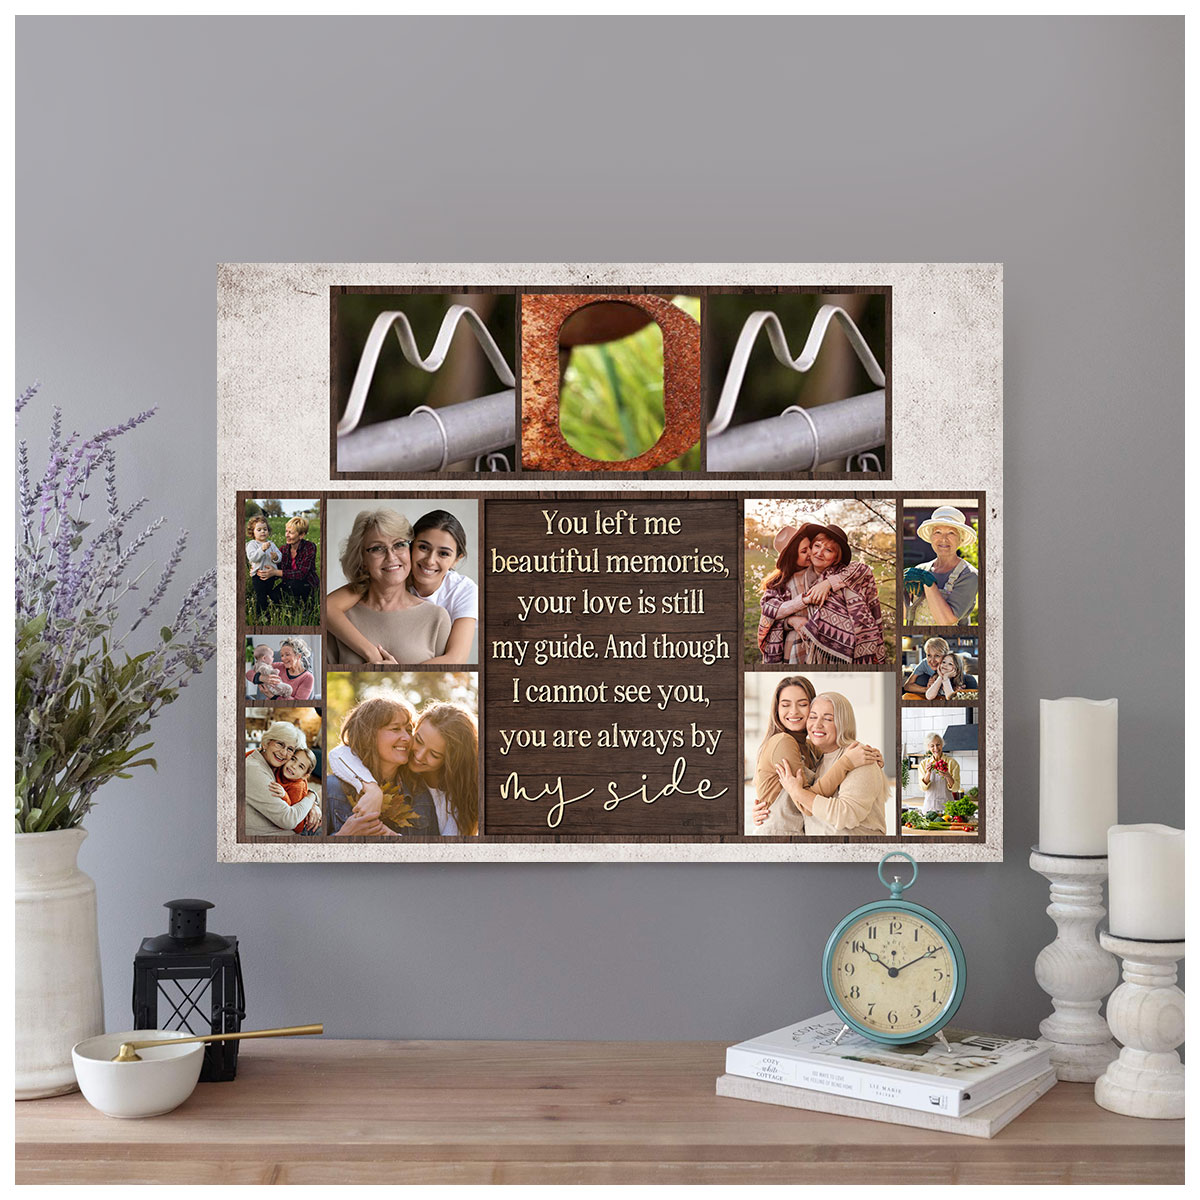 6-Opening Tree Collage Photo Frame - Memories Engraved